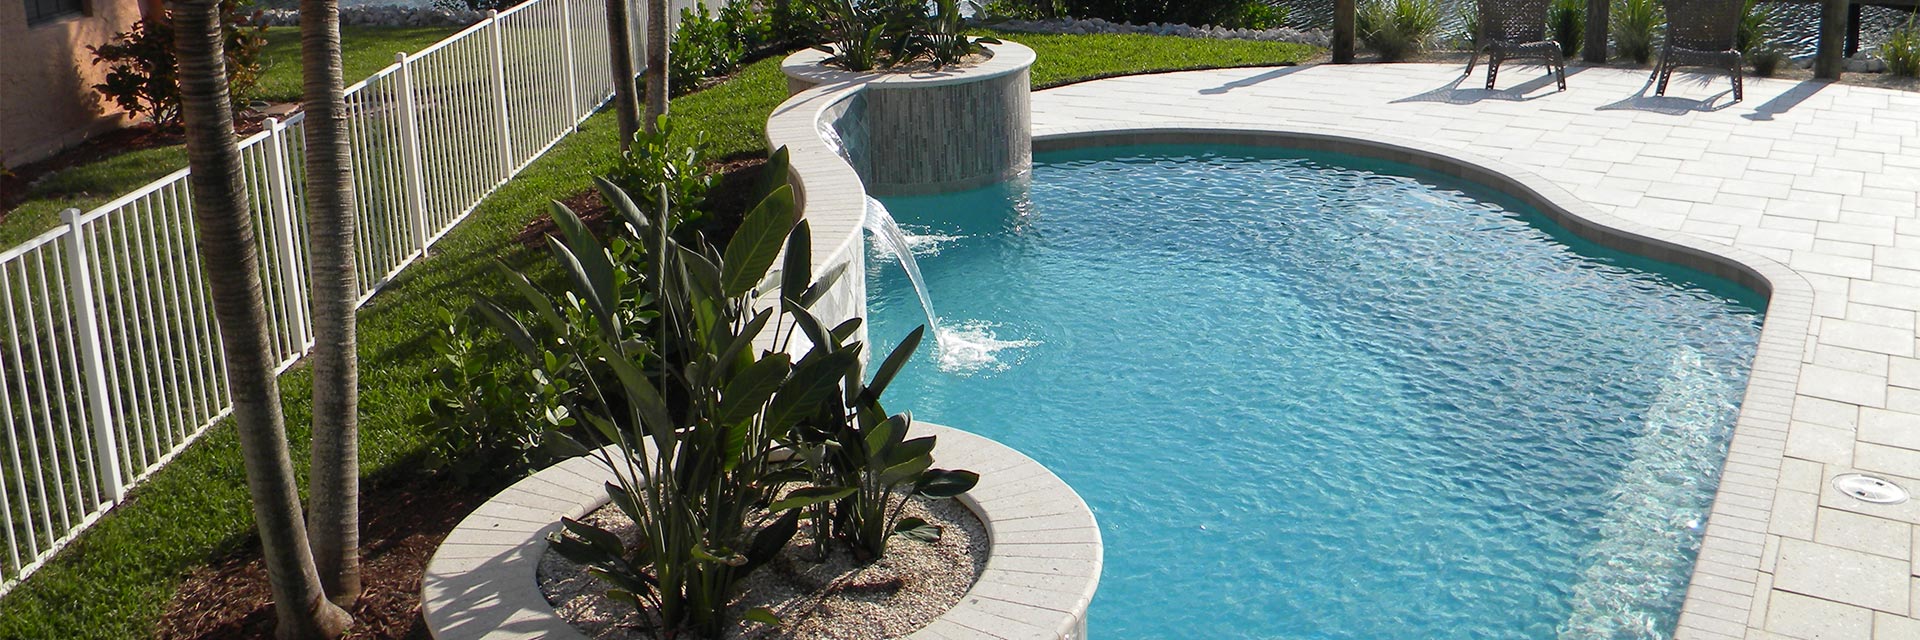 sparkling clean pool with water feature